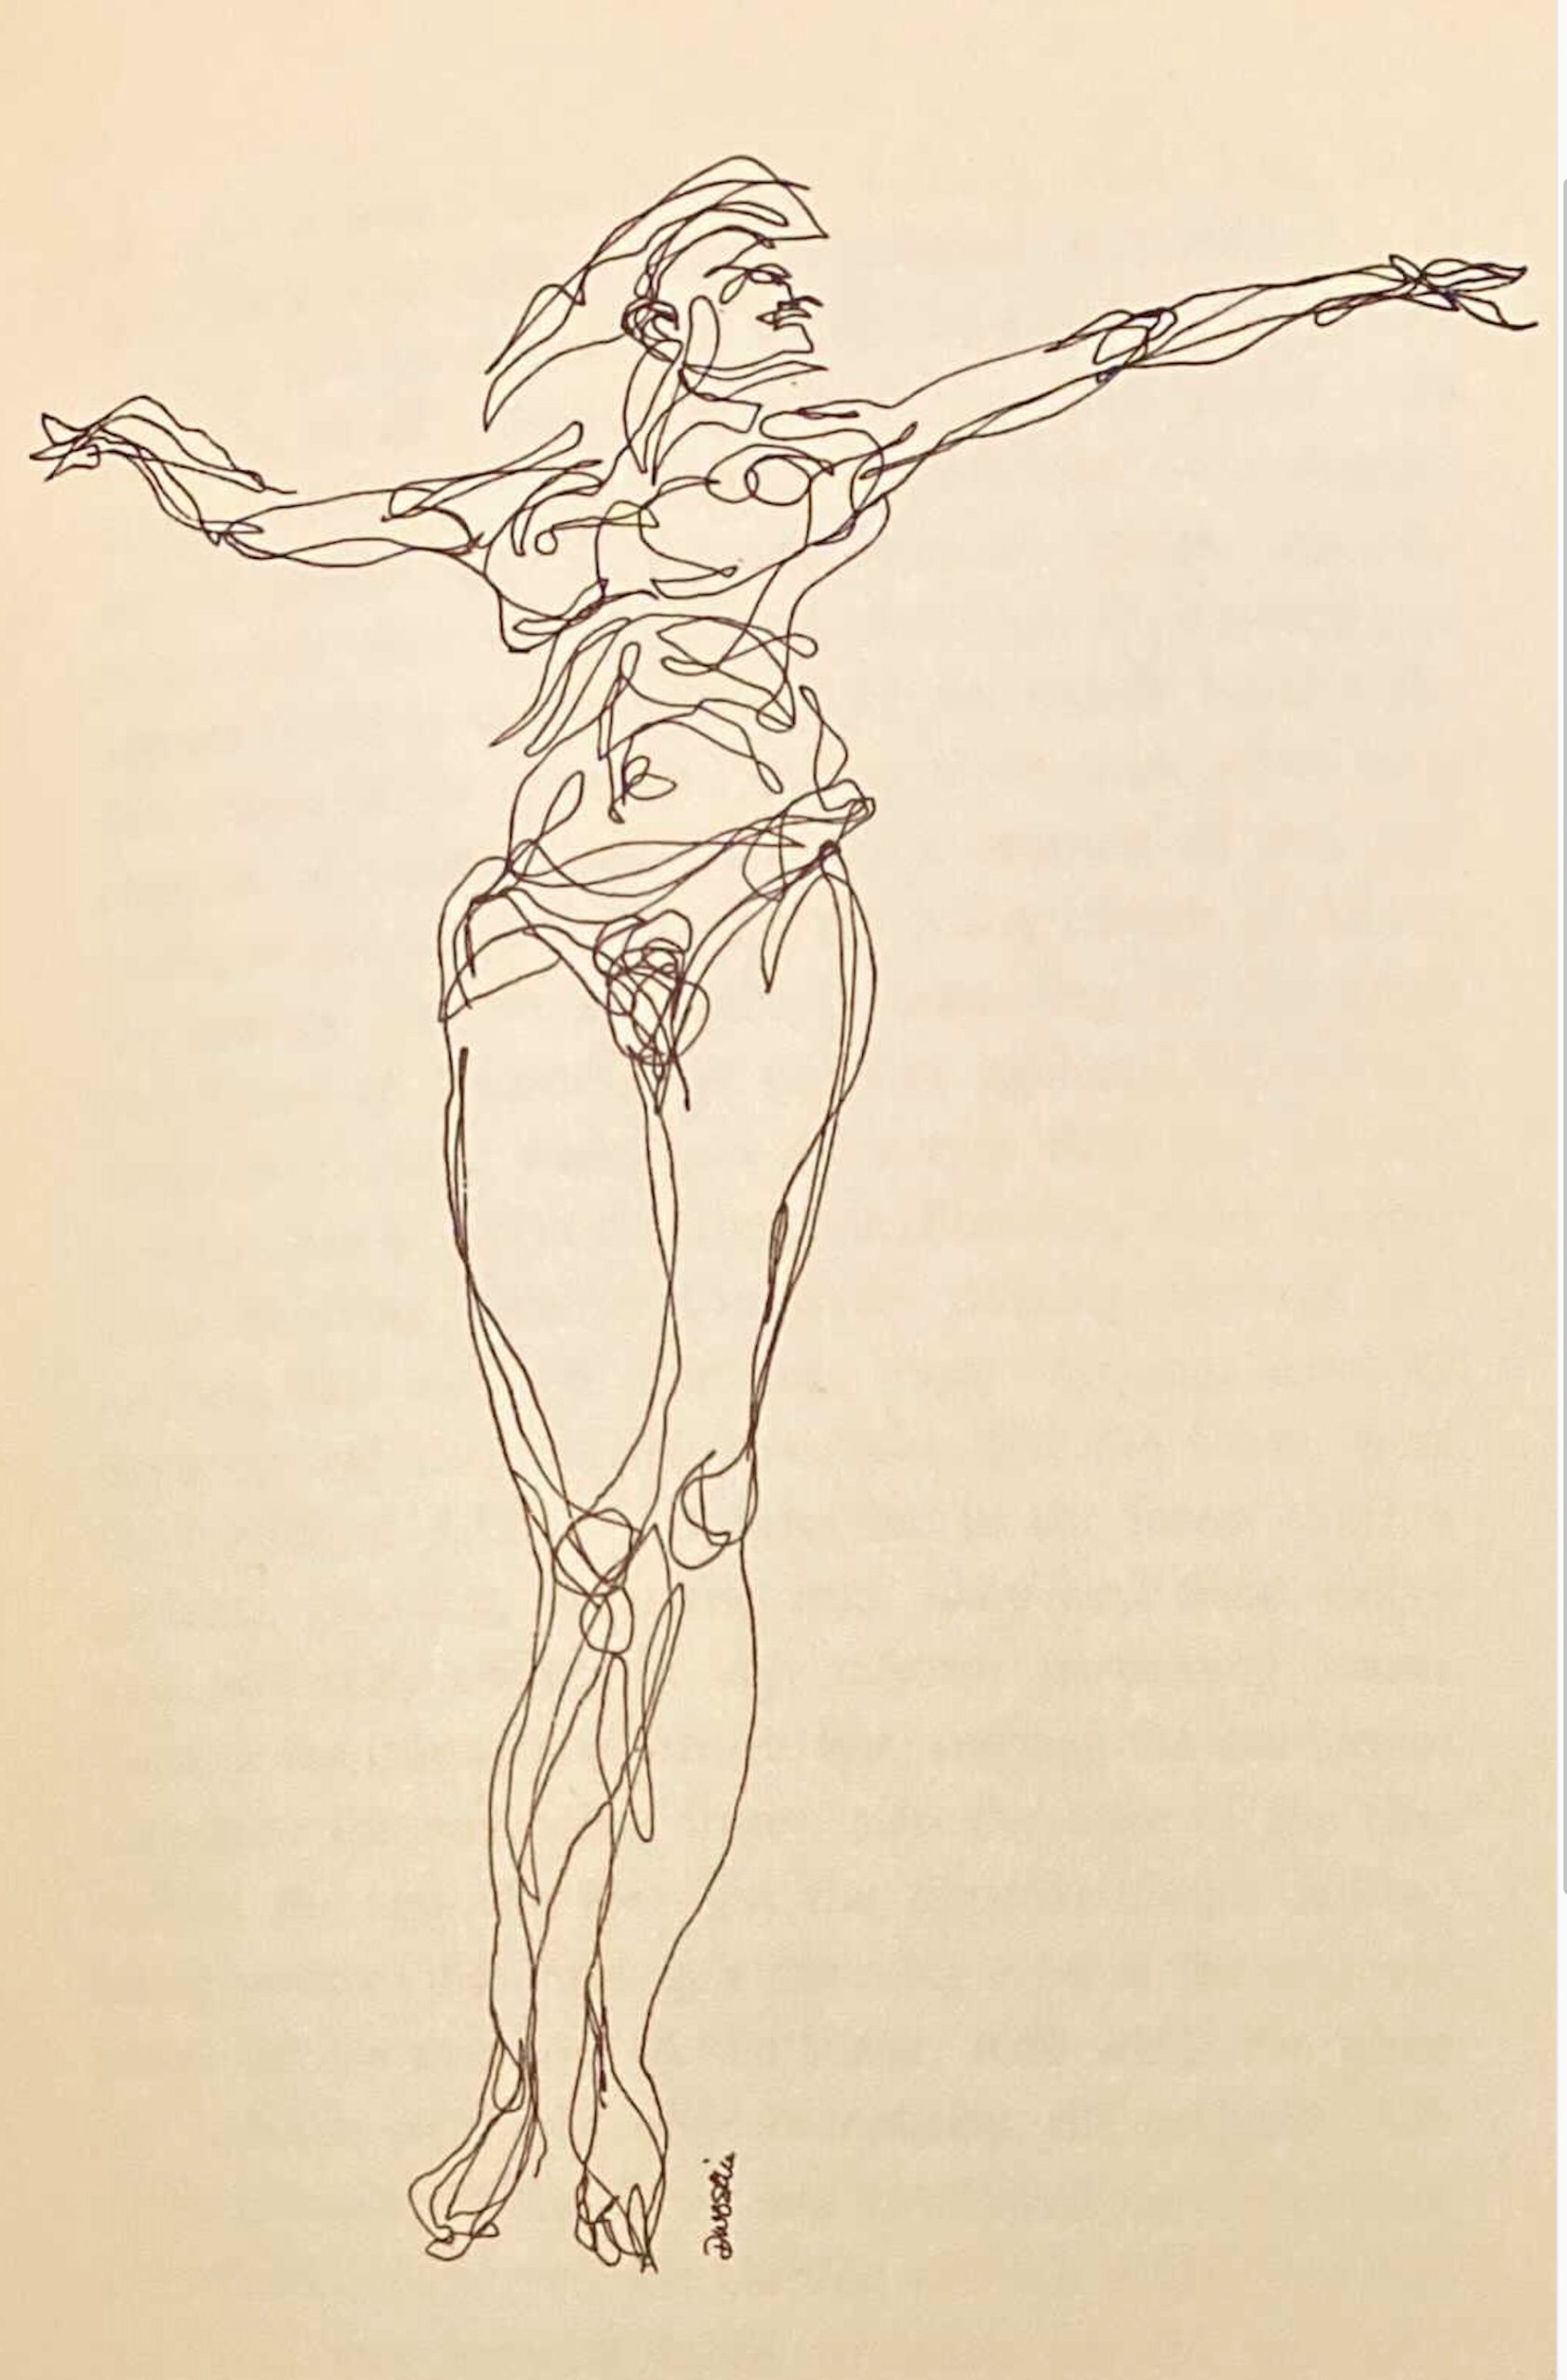 A pen drawing of a naked woman with her arms outstretched, drawn in a continuous abstracted line